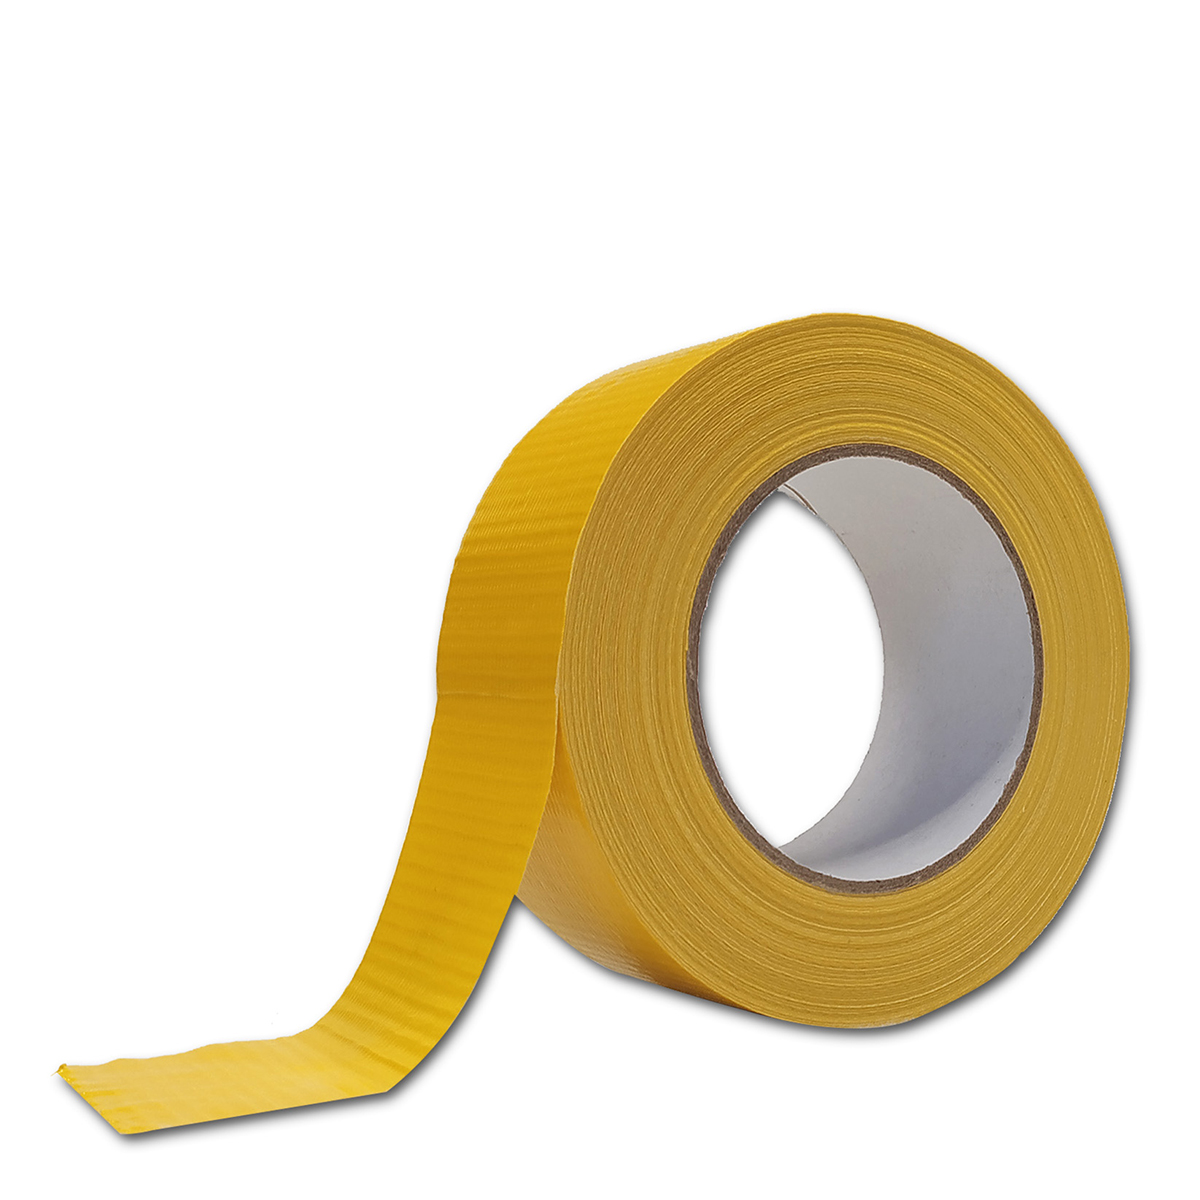 Panzertape 48,5 mm x 50 m Duct Tape gelb - verpacking